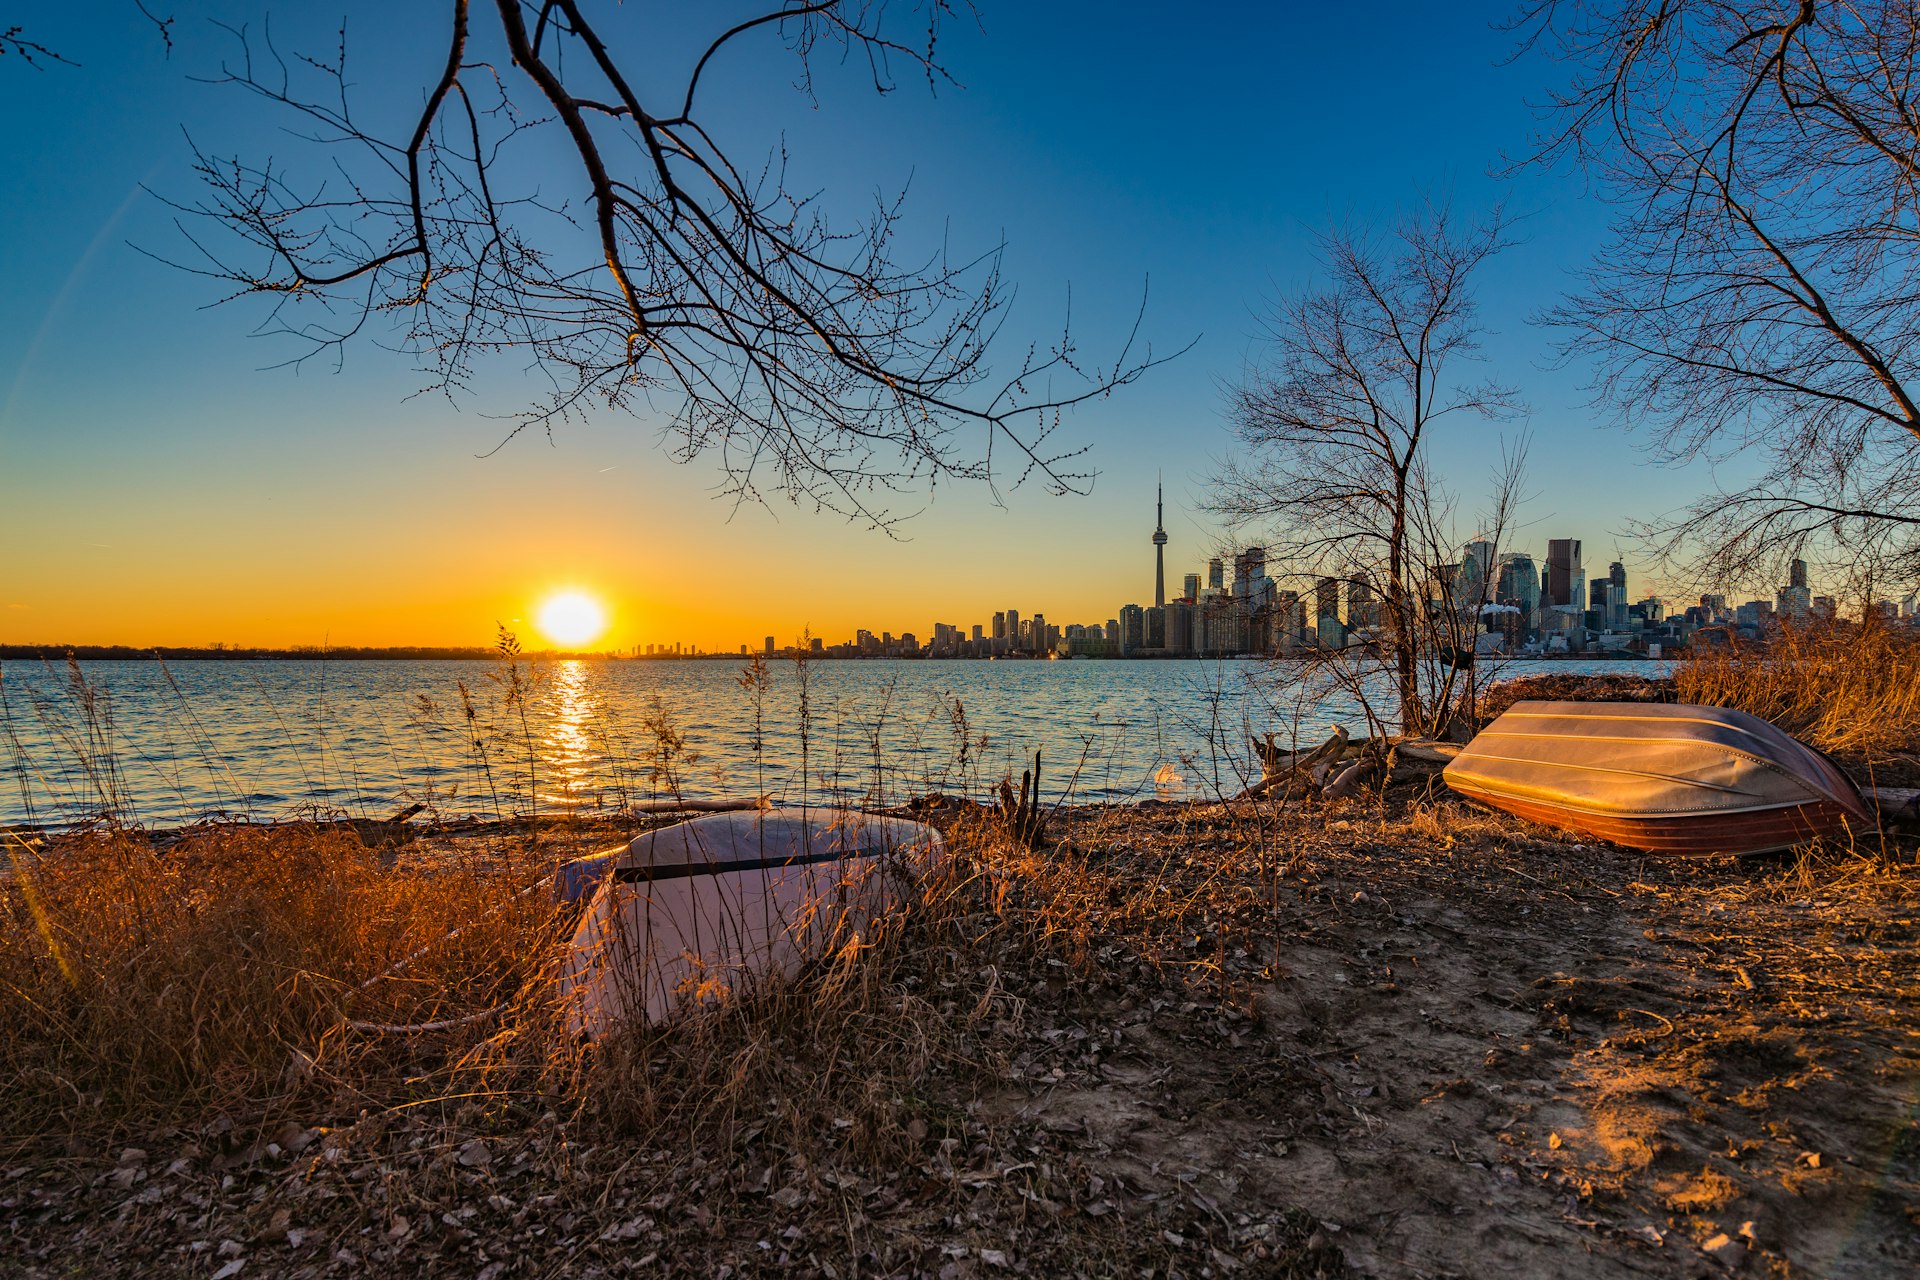 A sunset with a city skyline in the background, boats in the foreground